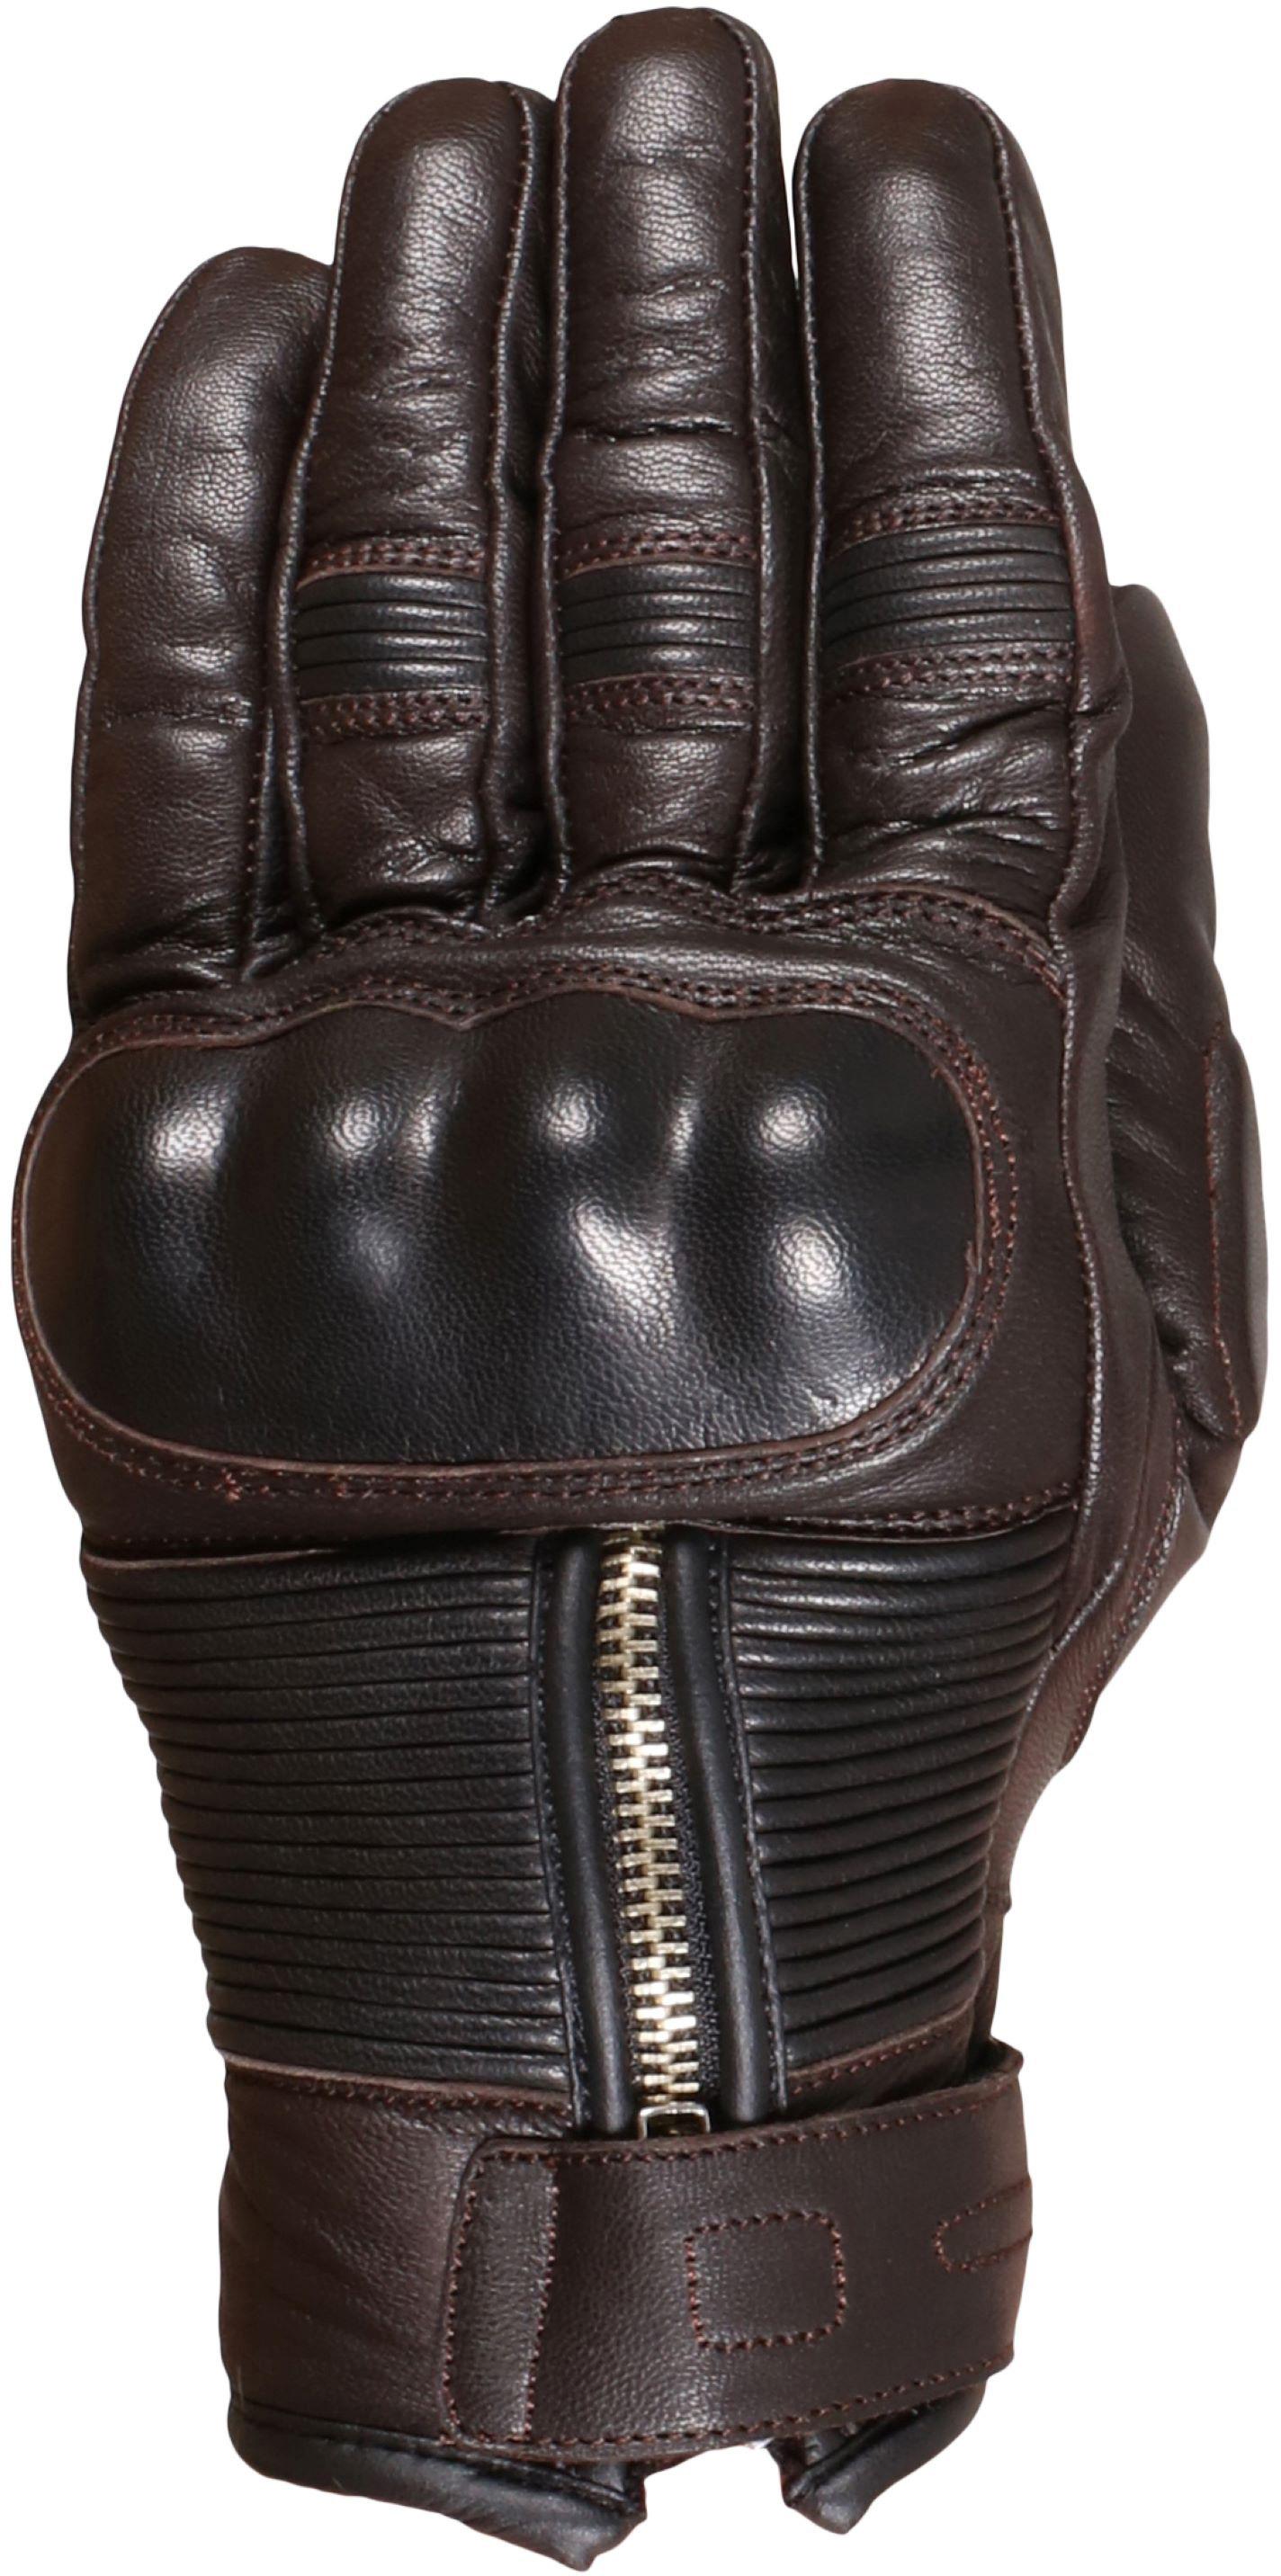 Weise Union Motorcycle Gloves - Brown, Xl